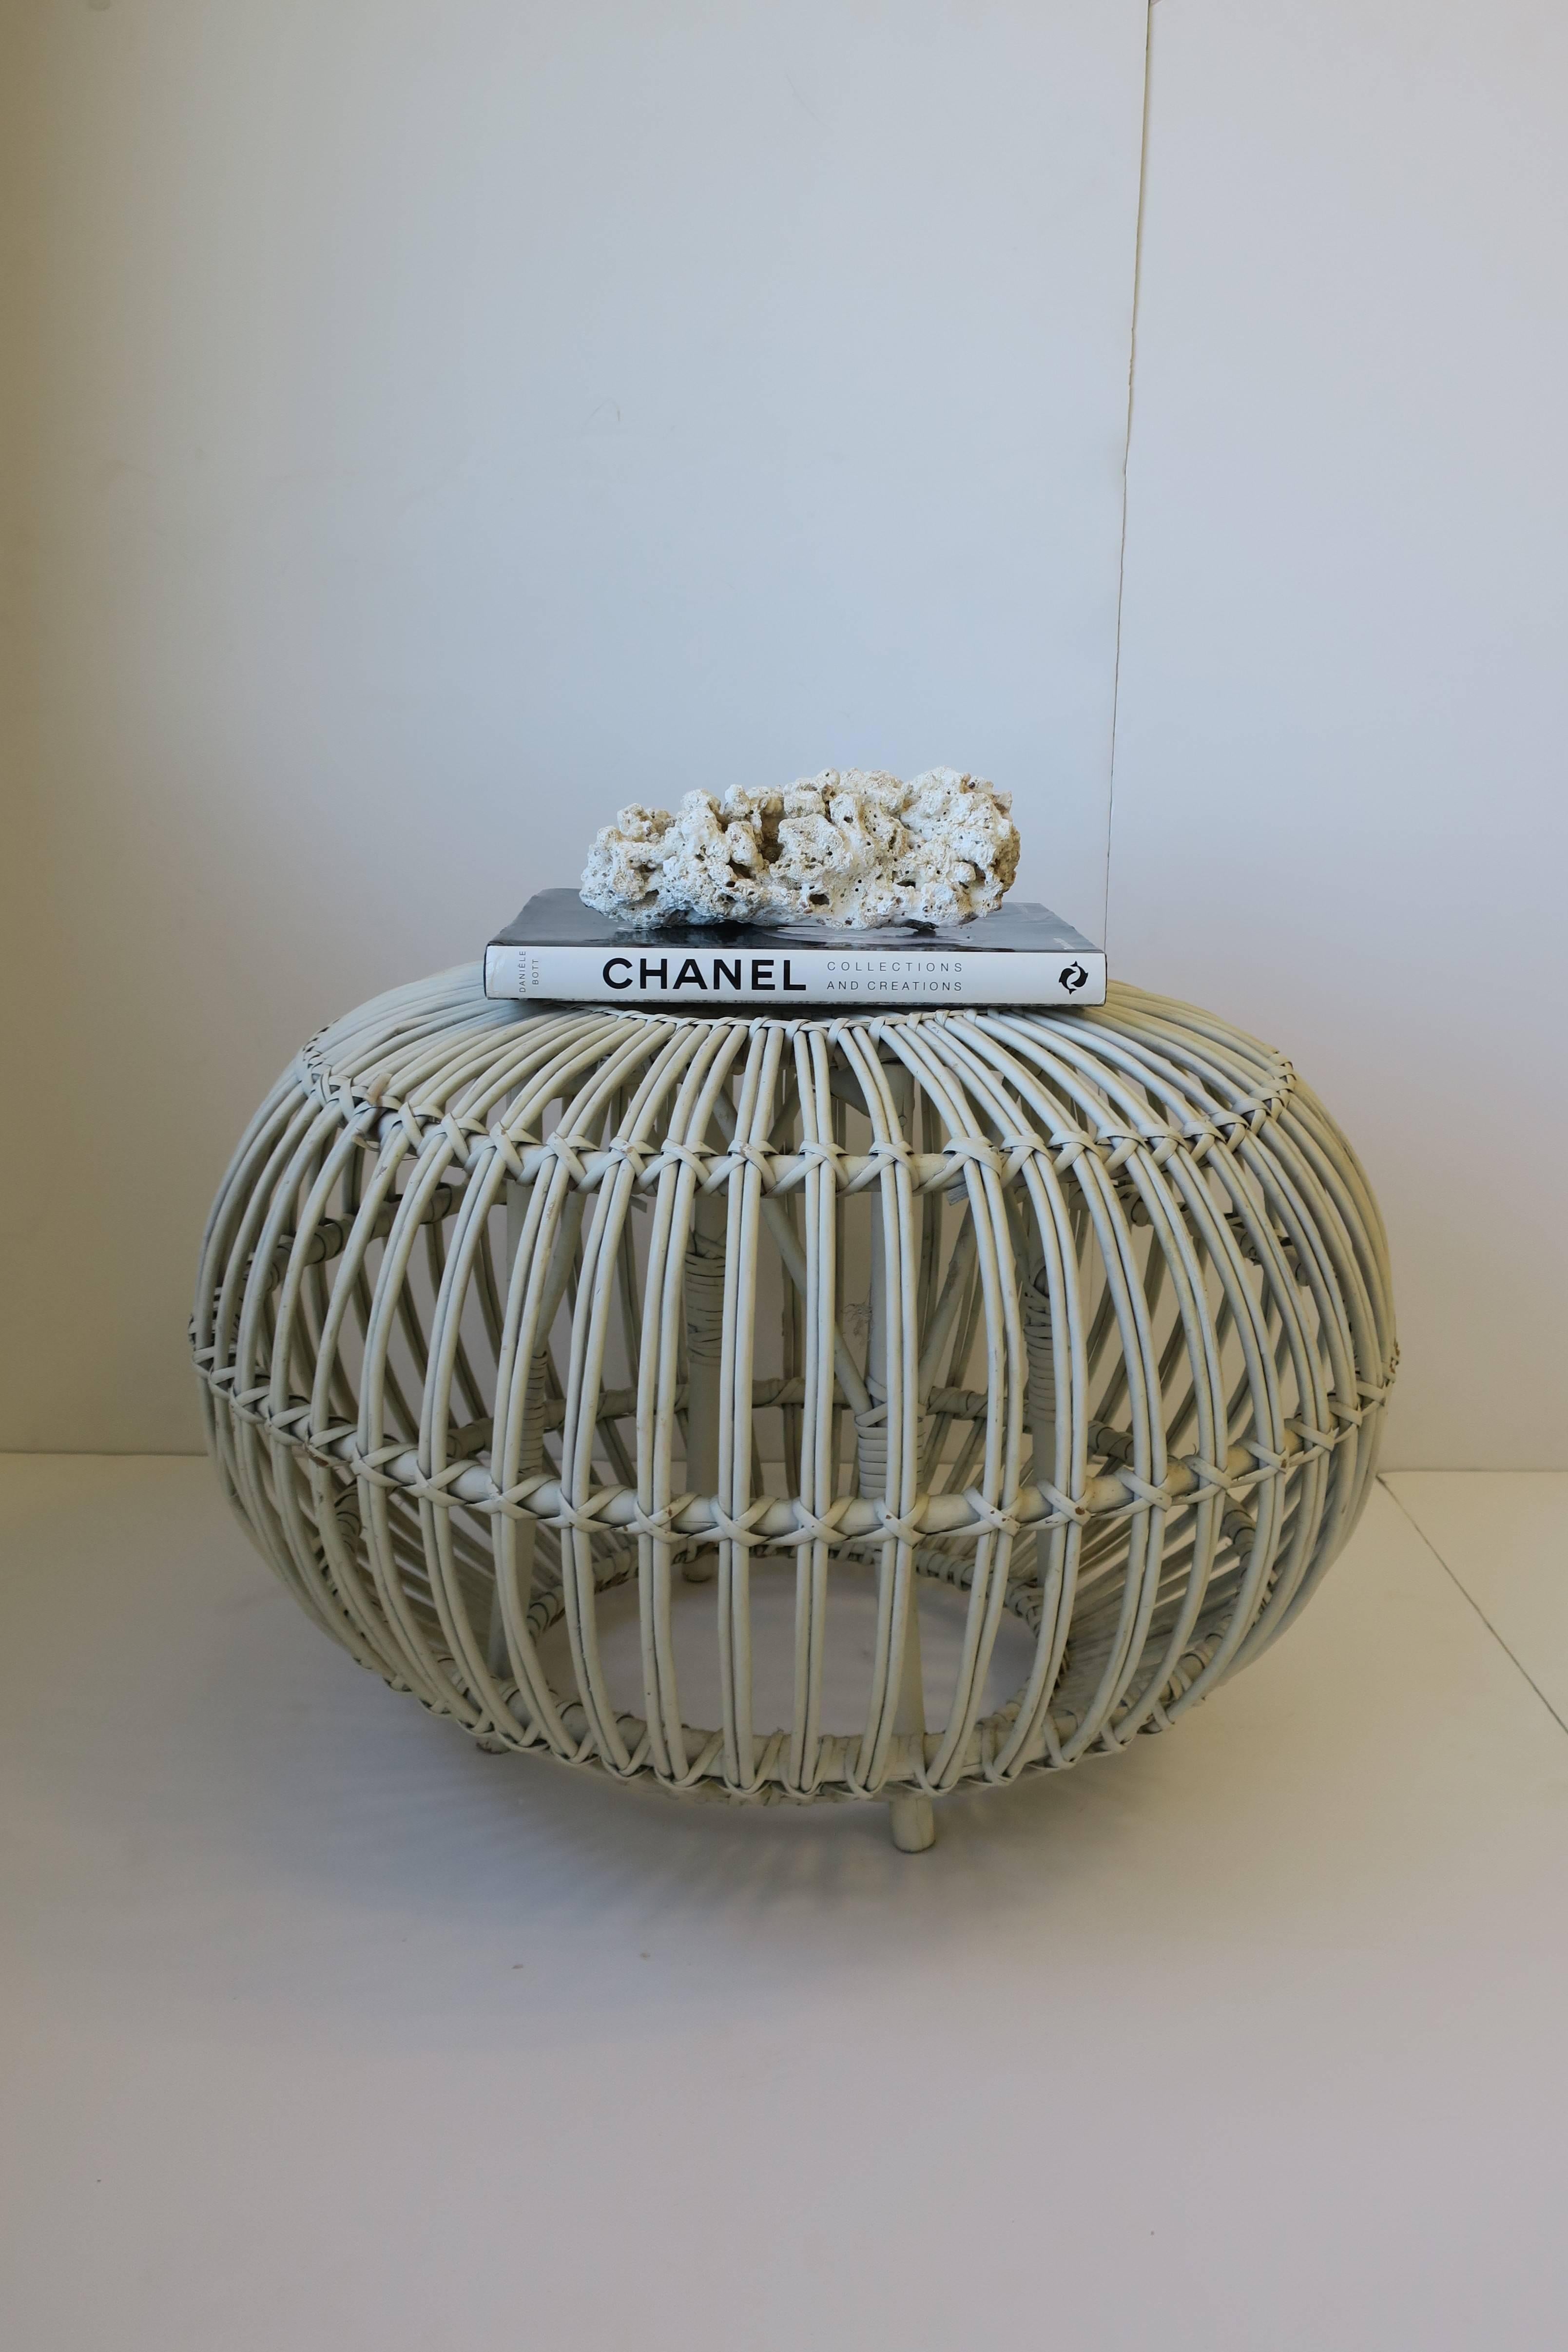 Mid-Century Modern Midcentury Round White Rattan Stool or Side Table by Franco Albini